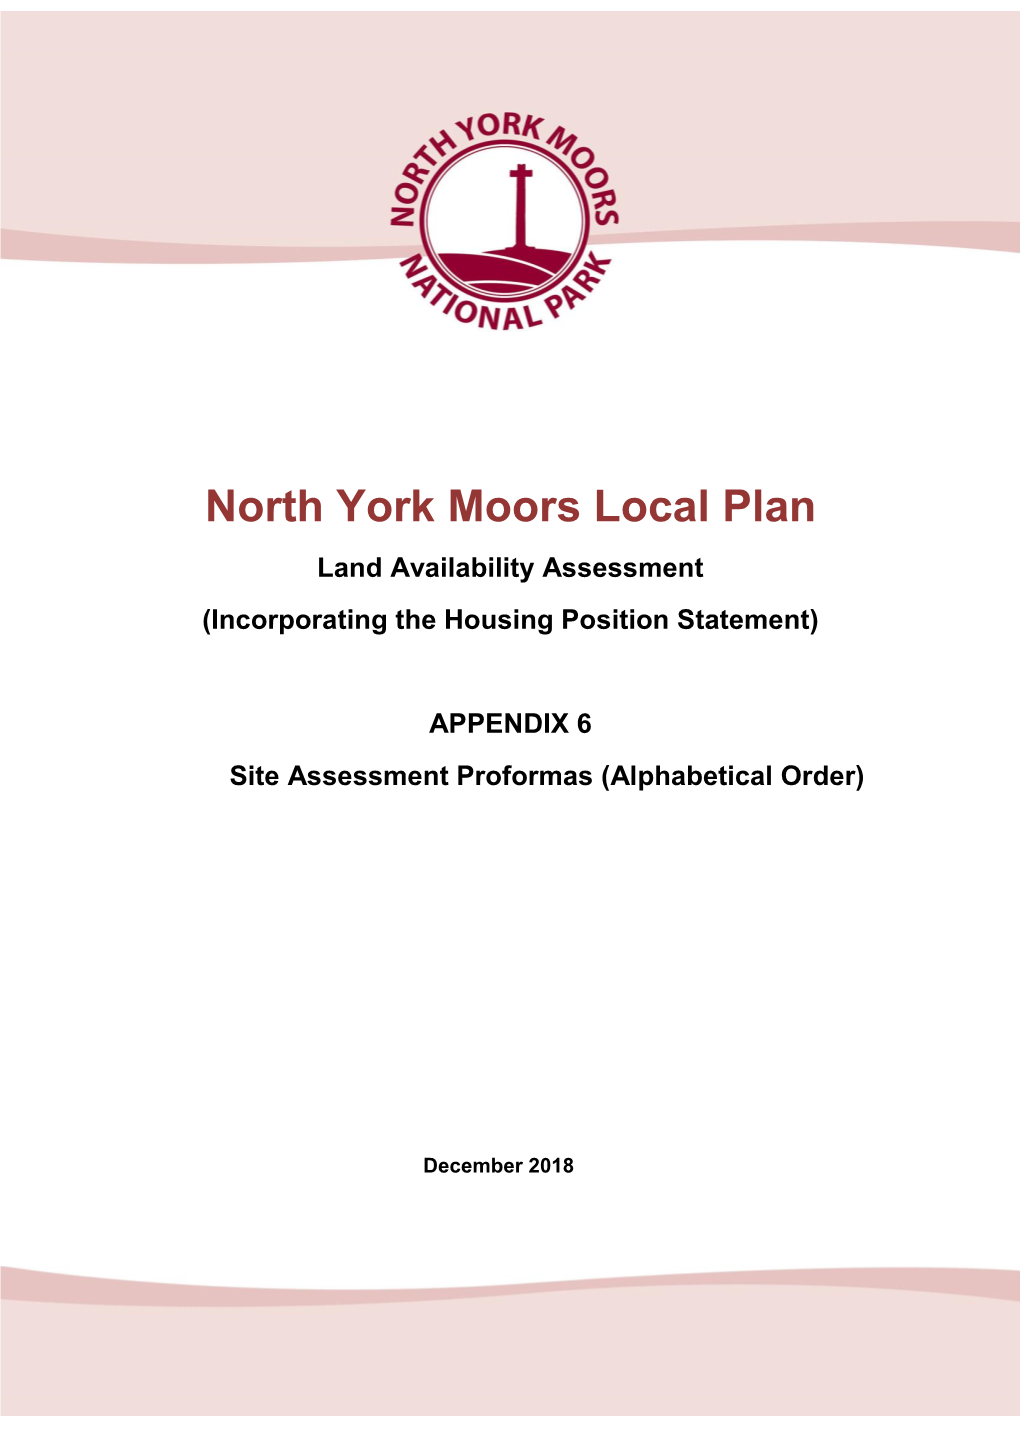 North York Moors Local Plan Land Availability Assessment (Incorporating the Housing Position Statement)